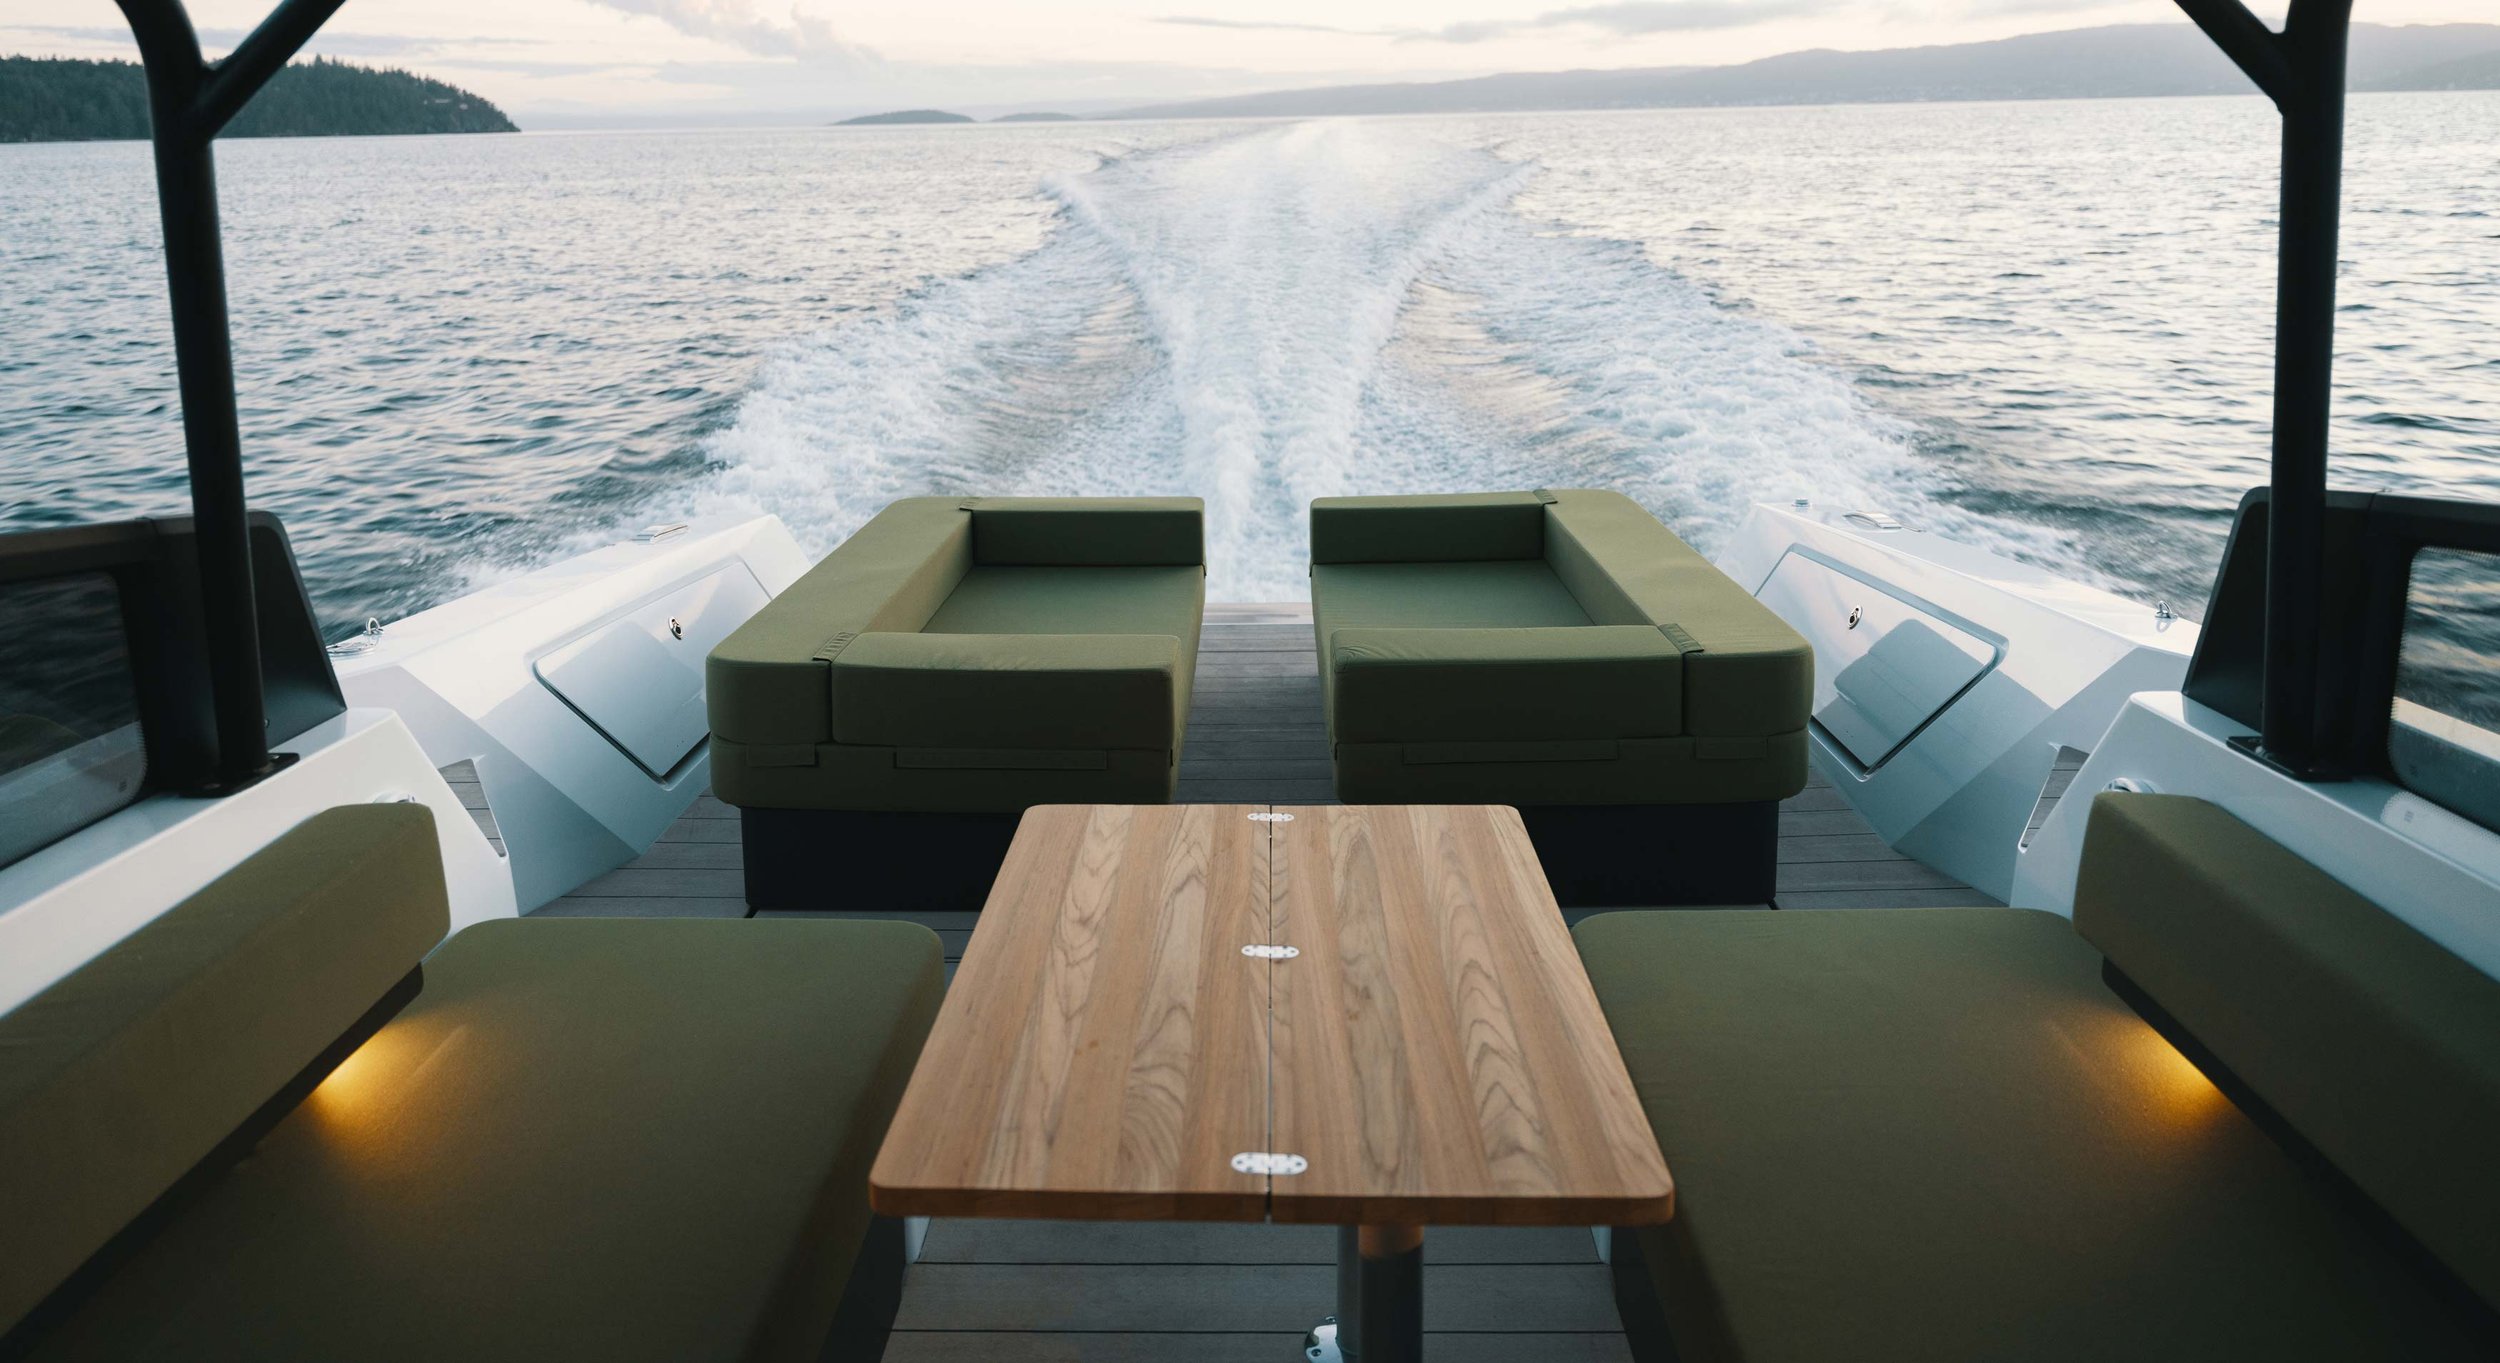 Goldfish 43 Ocean | The ideal platform for a relaxing day at sea ...